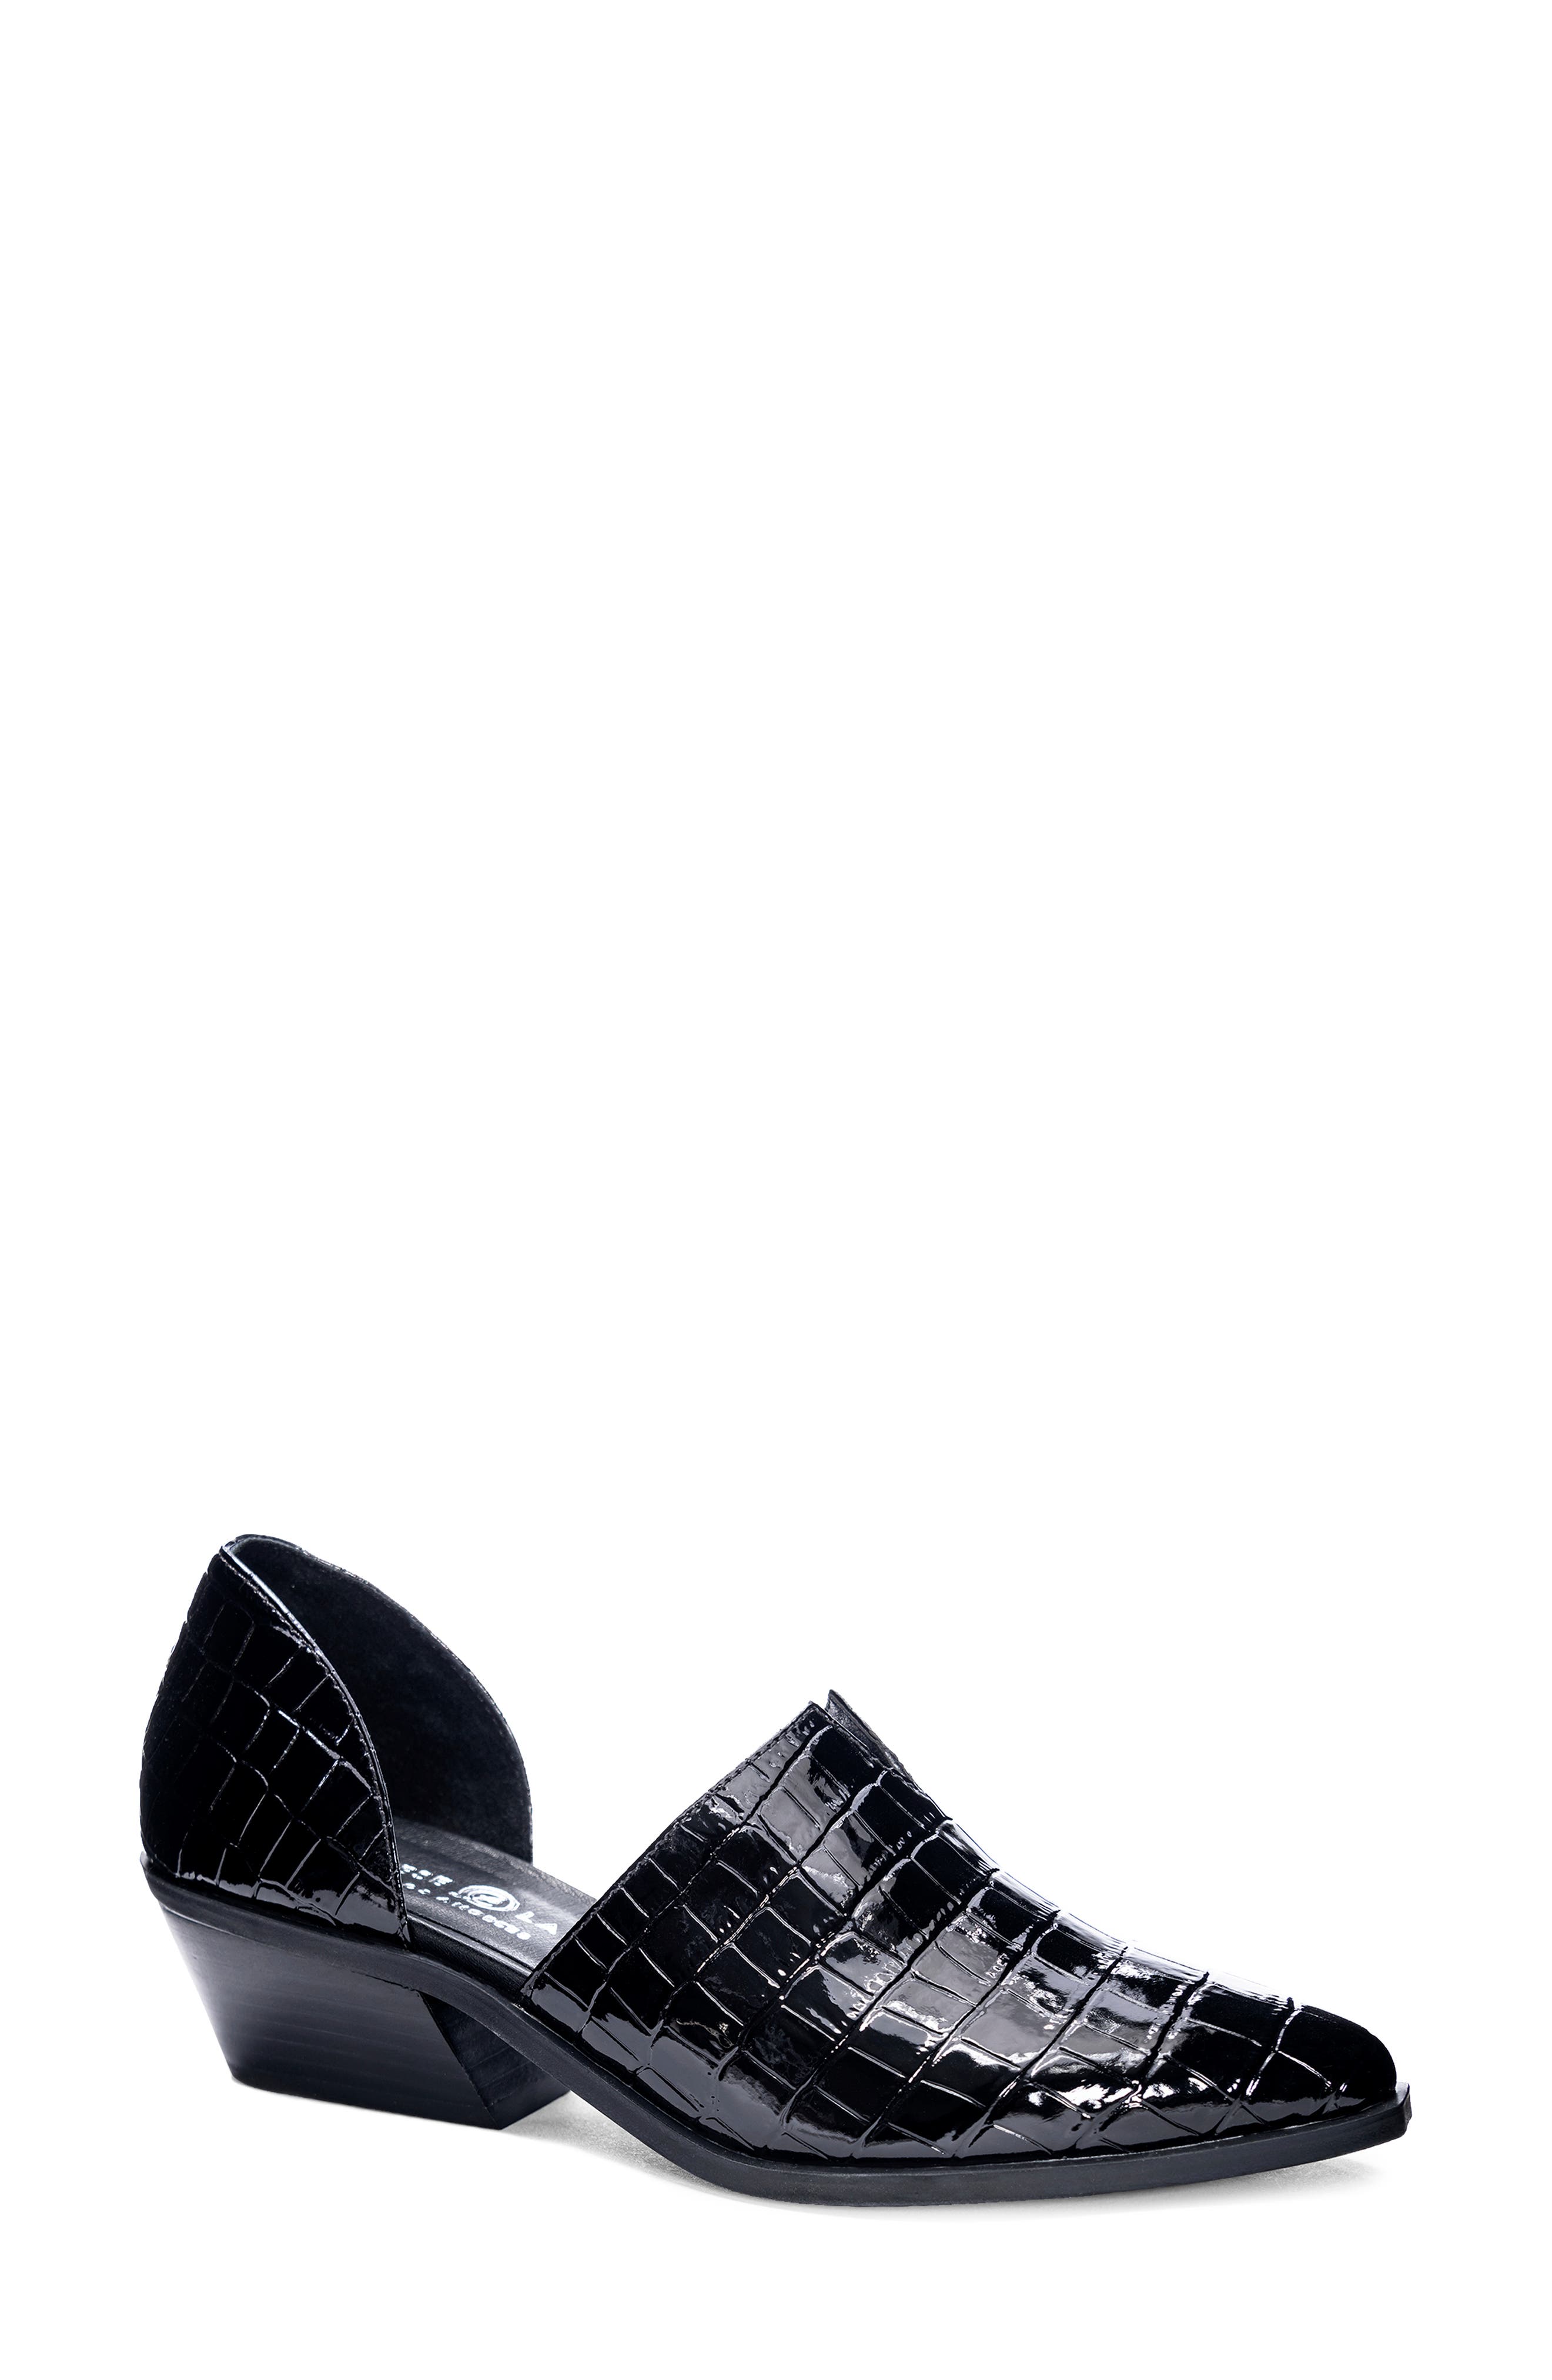 Buy > black flat patent leather shoes > in stock